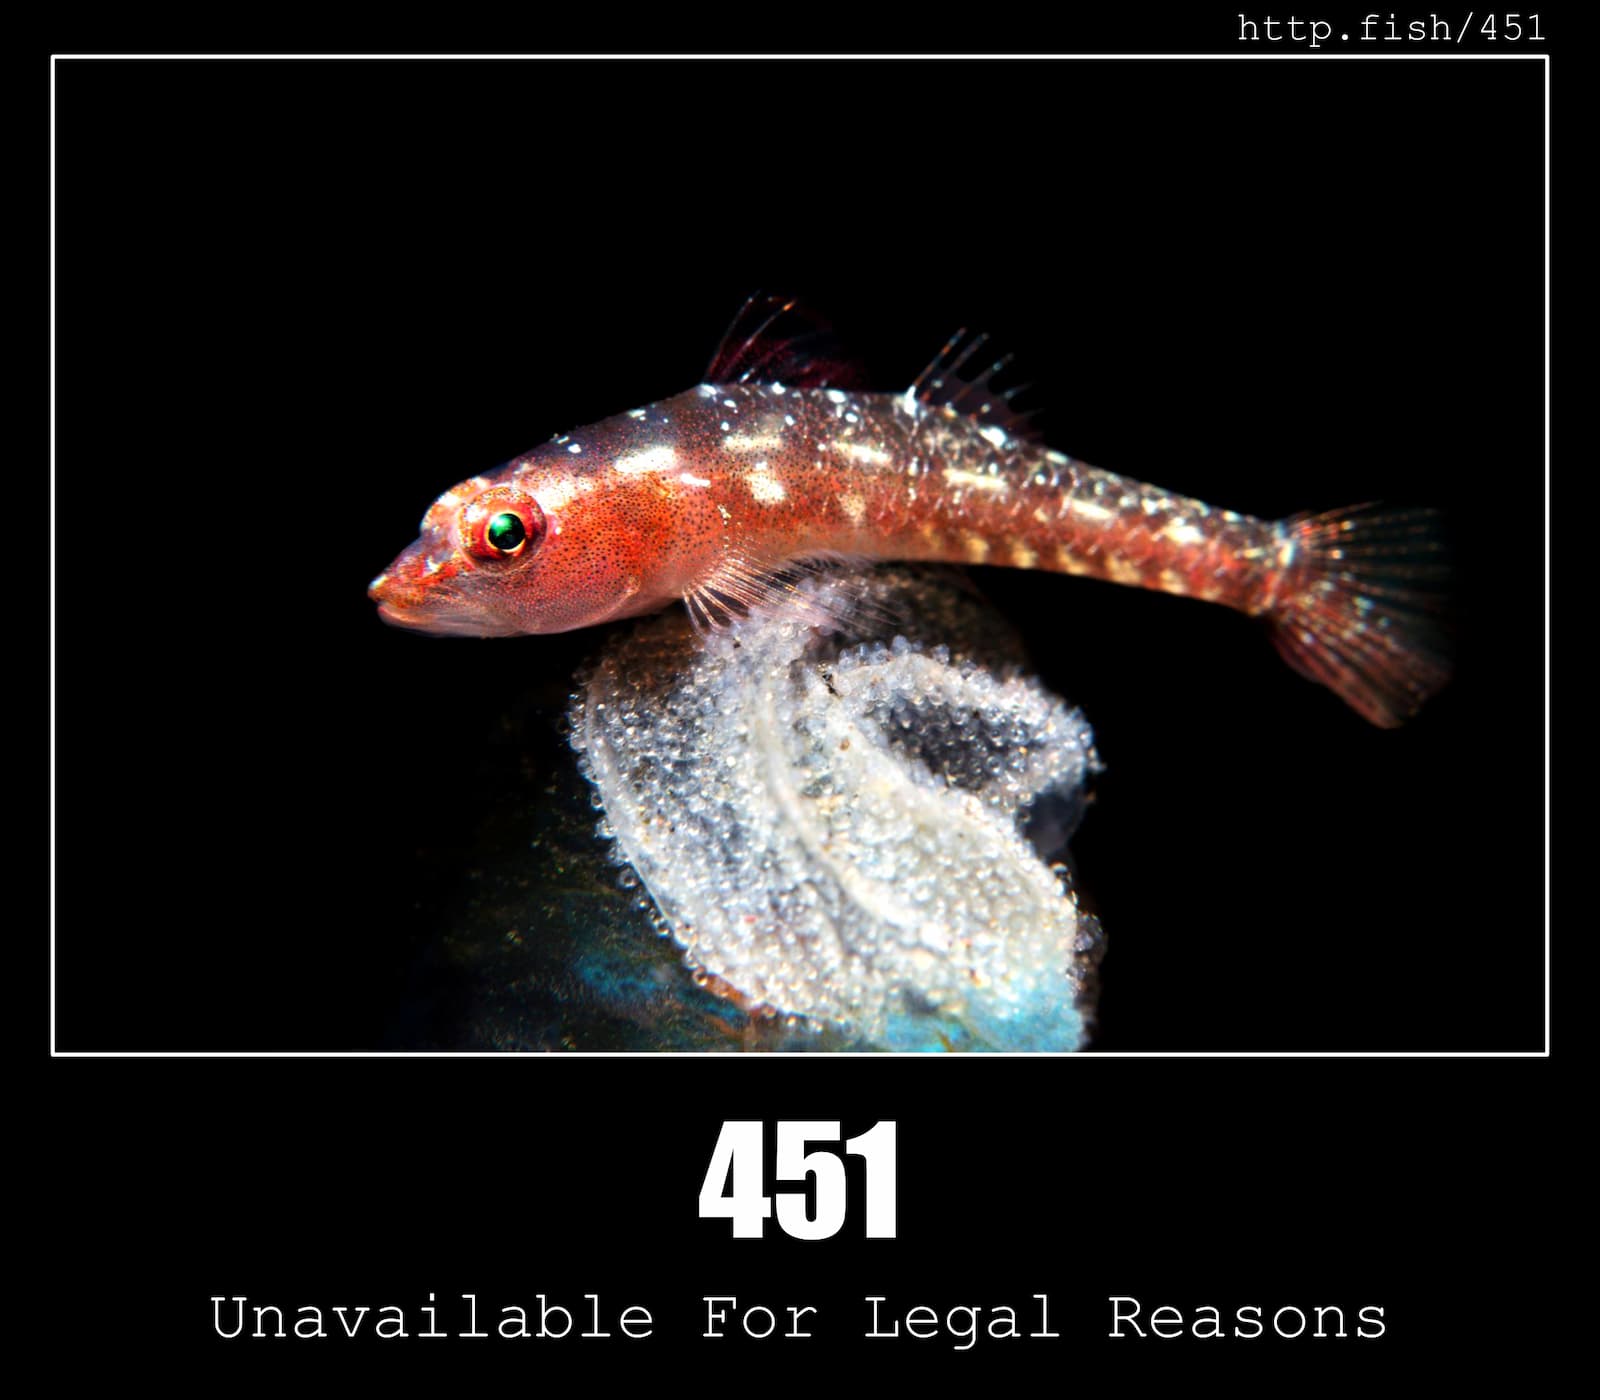 HTTP Status Code 451 Unavailable For Legal Reasons & Fish